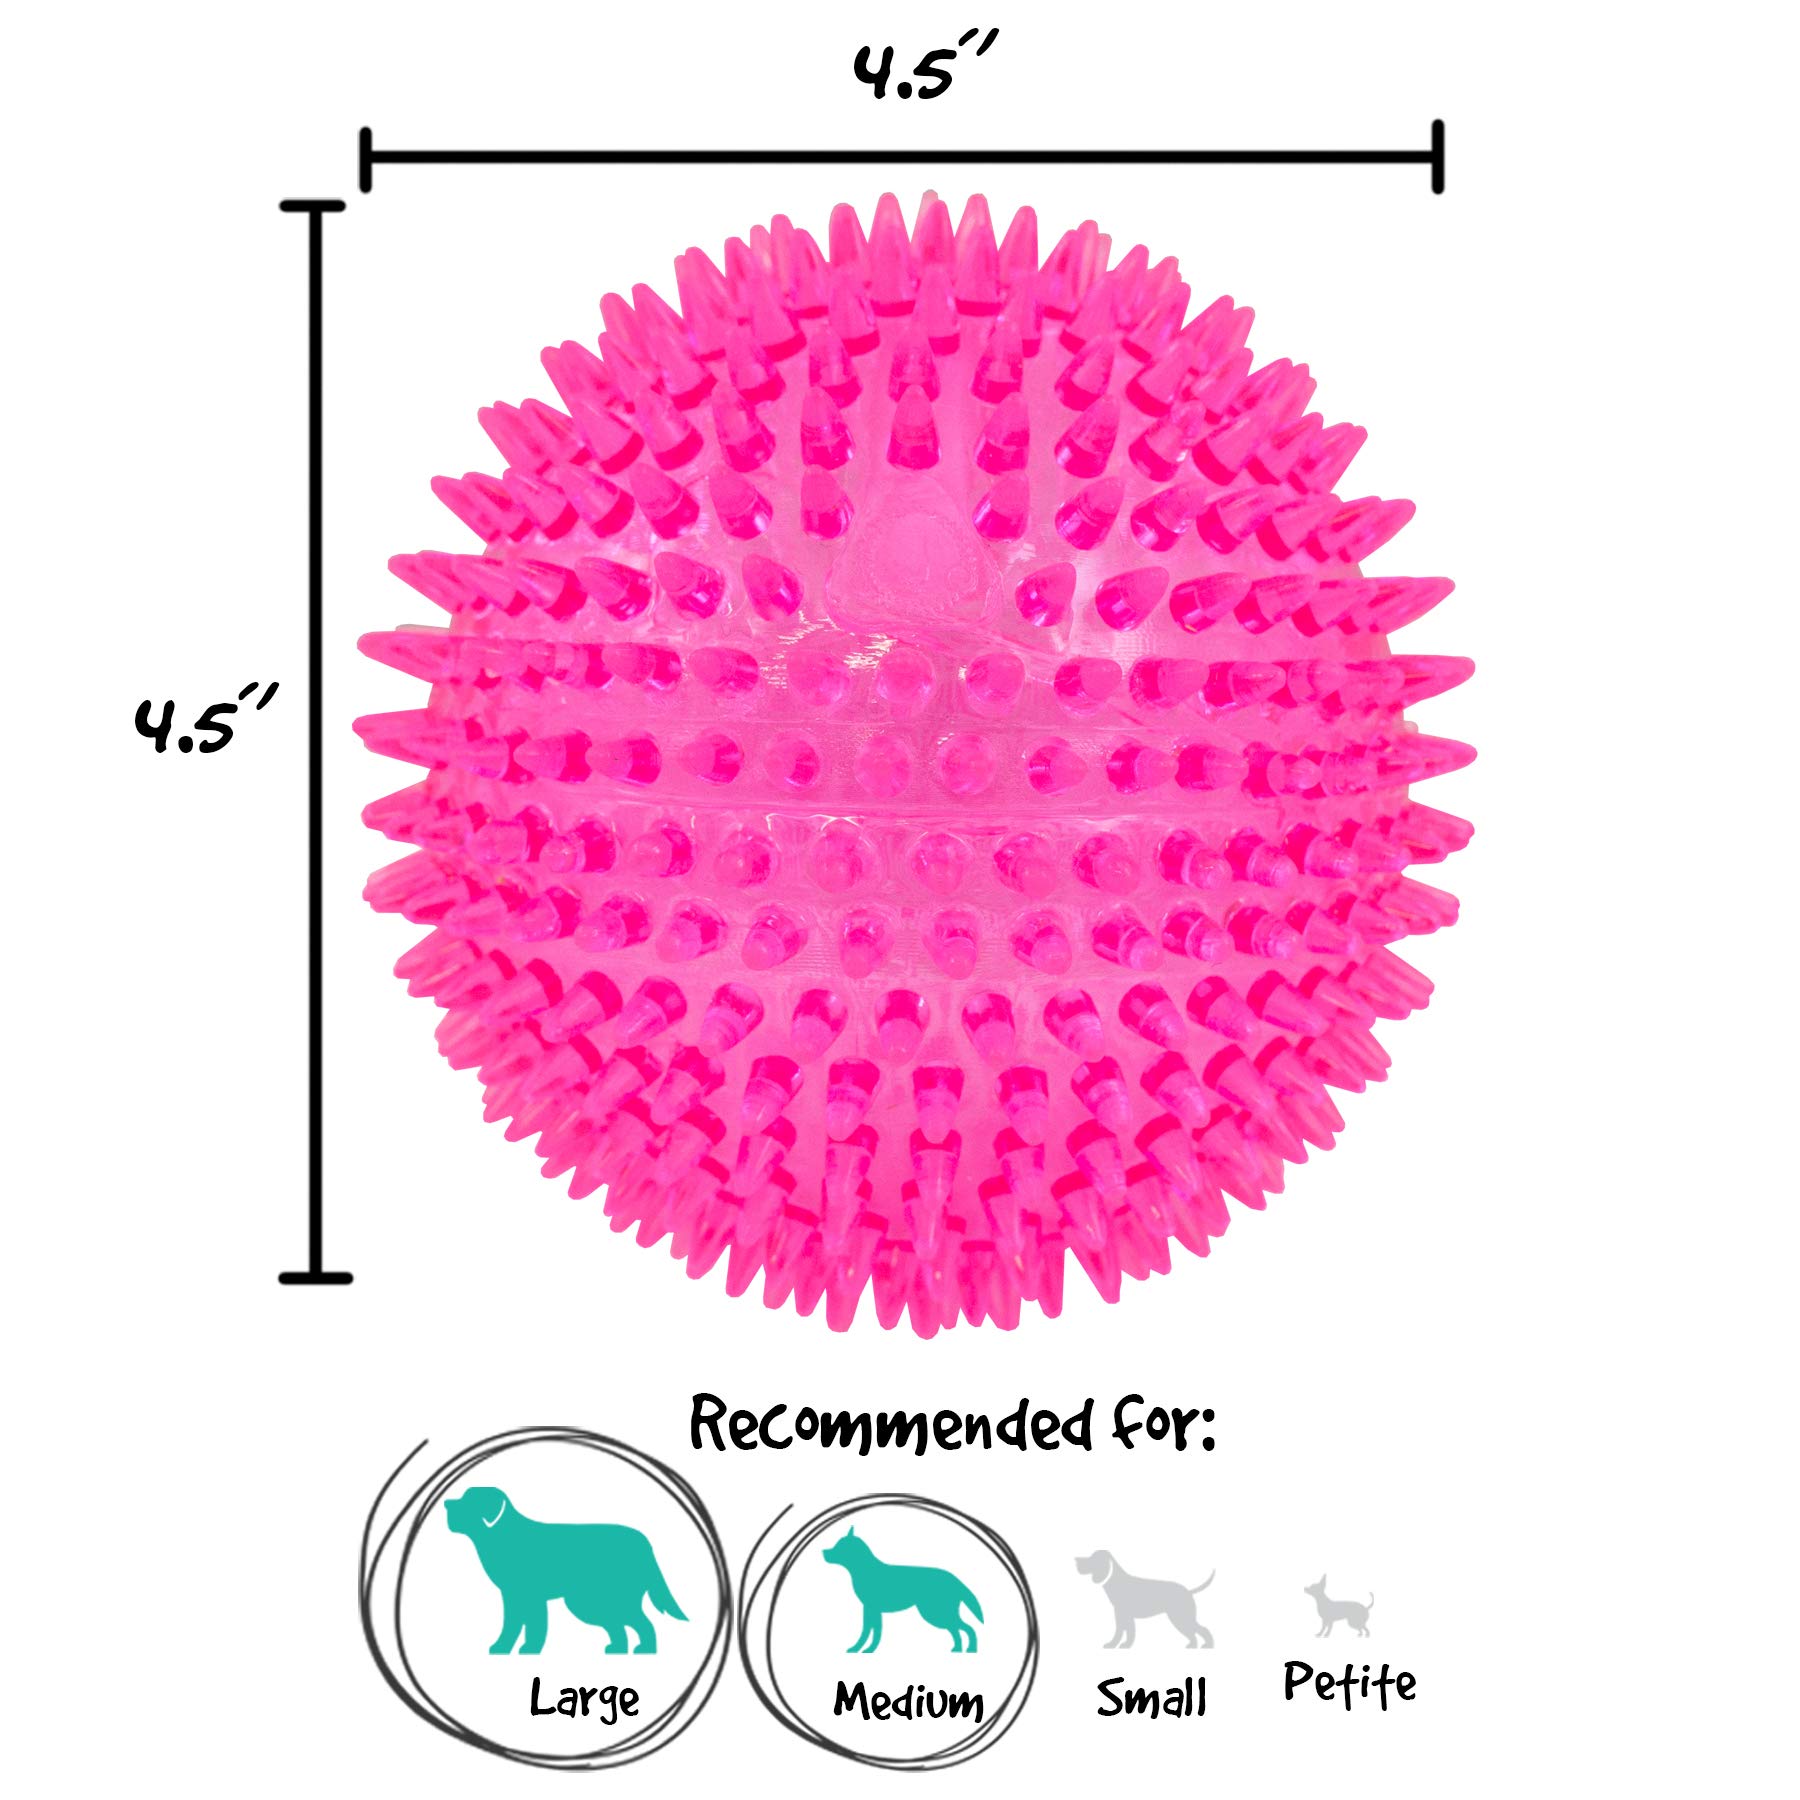 Gnawsome™ 4.5” Spiky Squeaker Ball Dog Toy - Extra Large, Cleans Teeth and Promotes Good Dental and Gum Health for Your Pet, Colors will vary, 4.5"